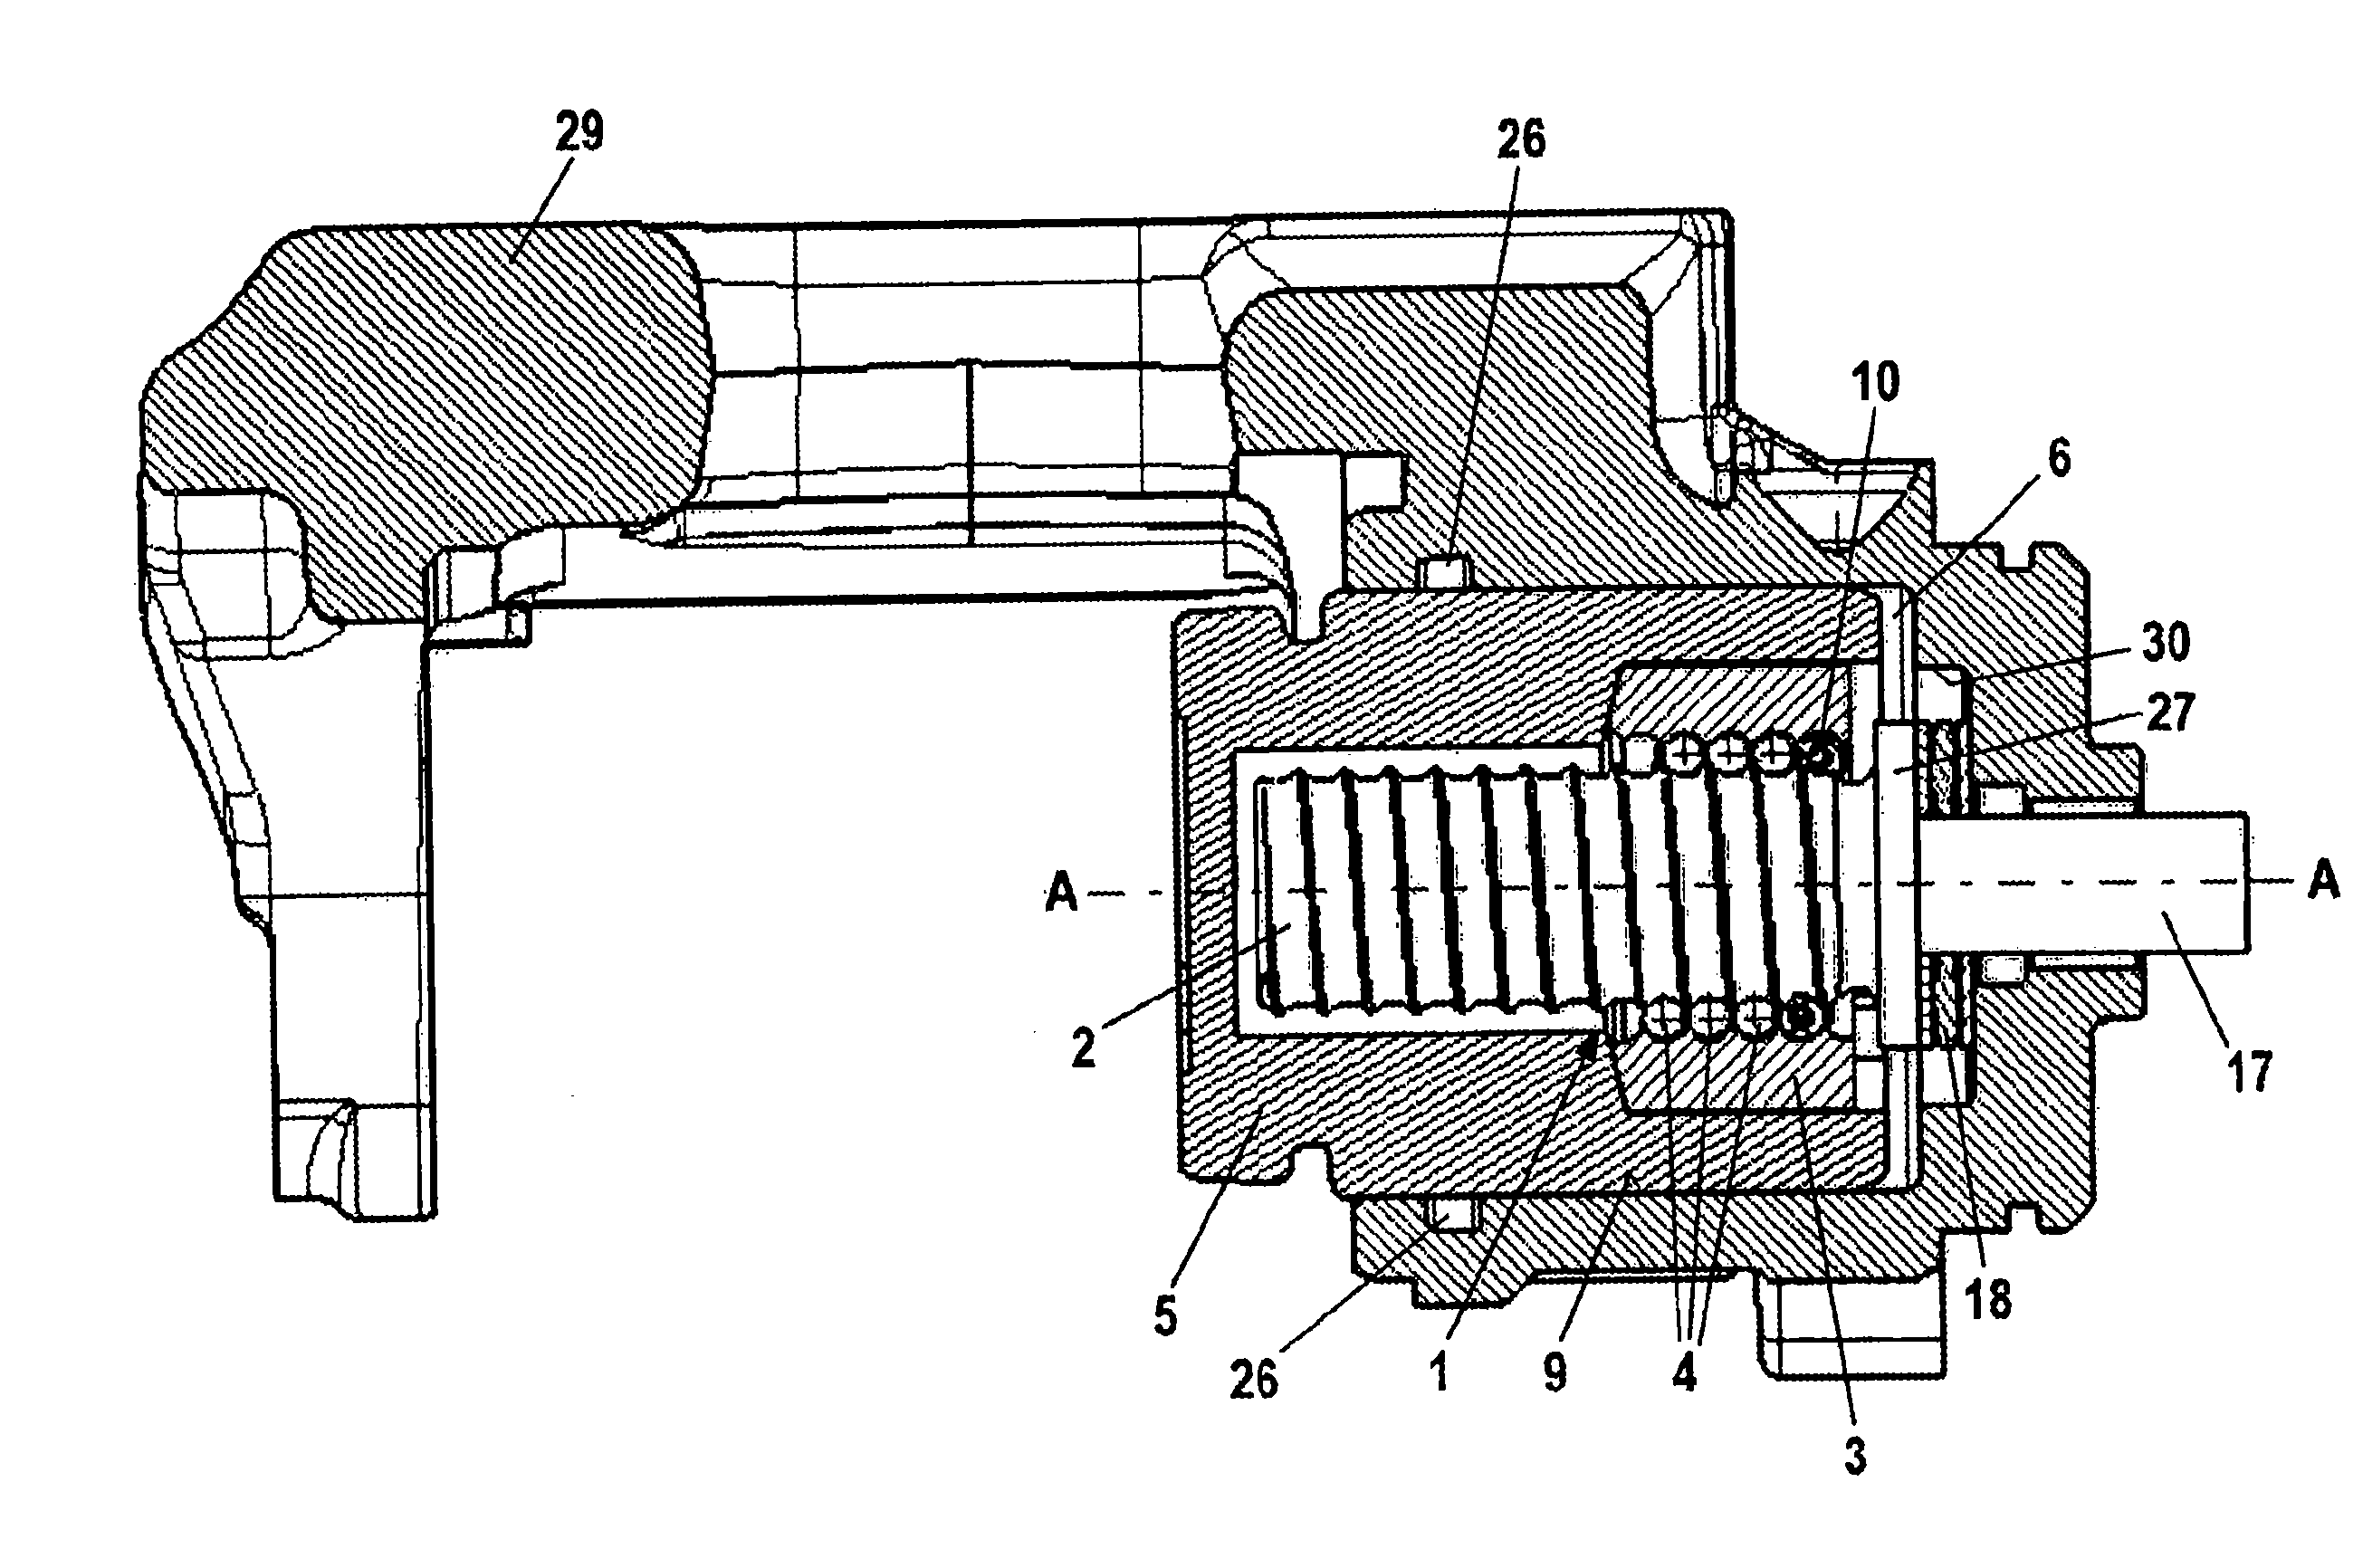 Combined Vehicle Brake With Electromechanically Operable Parking Brake and Gear For Converting A Rotary Movement Into A Translational Movement